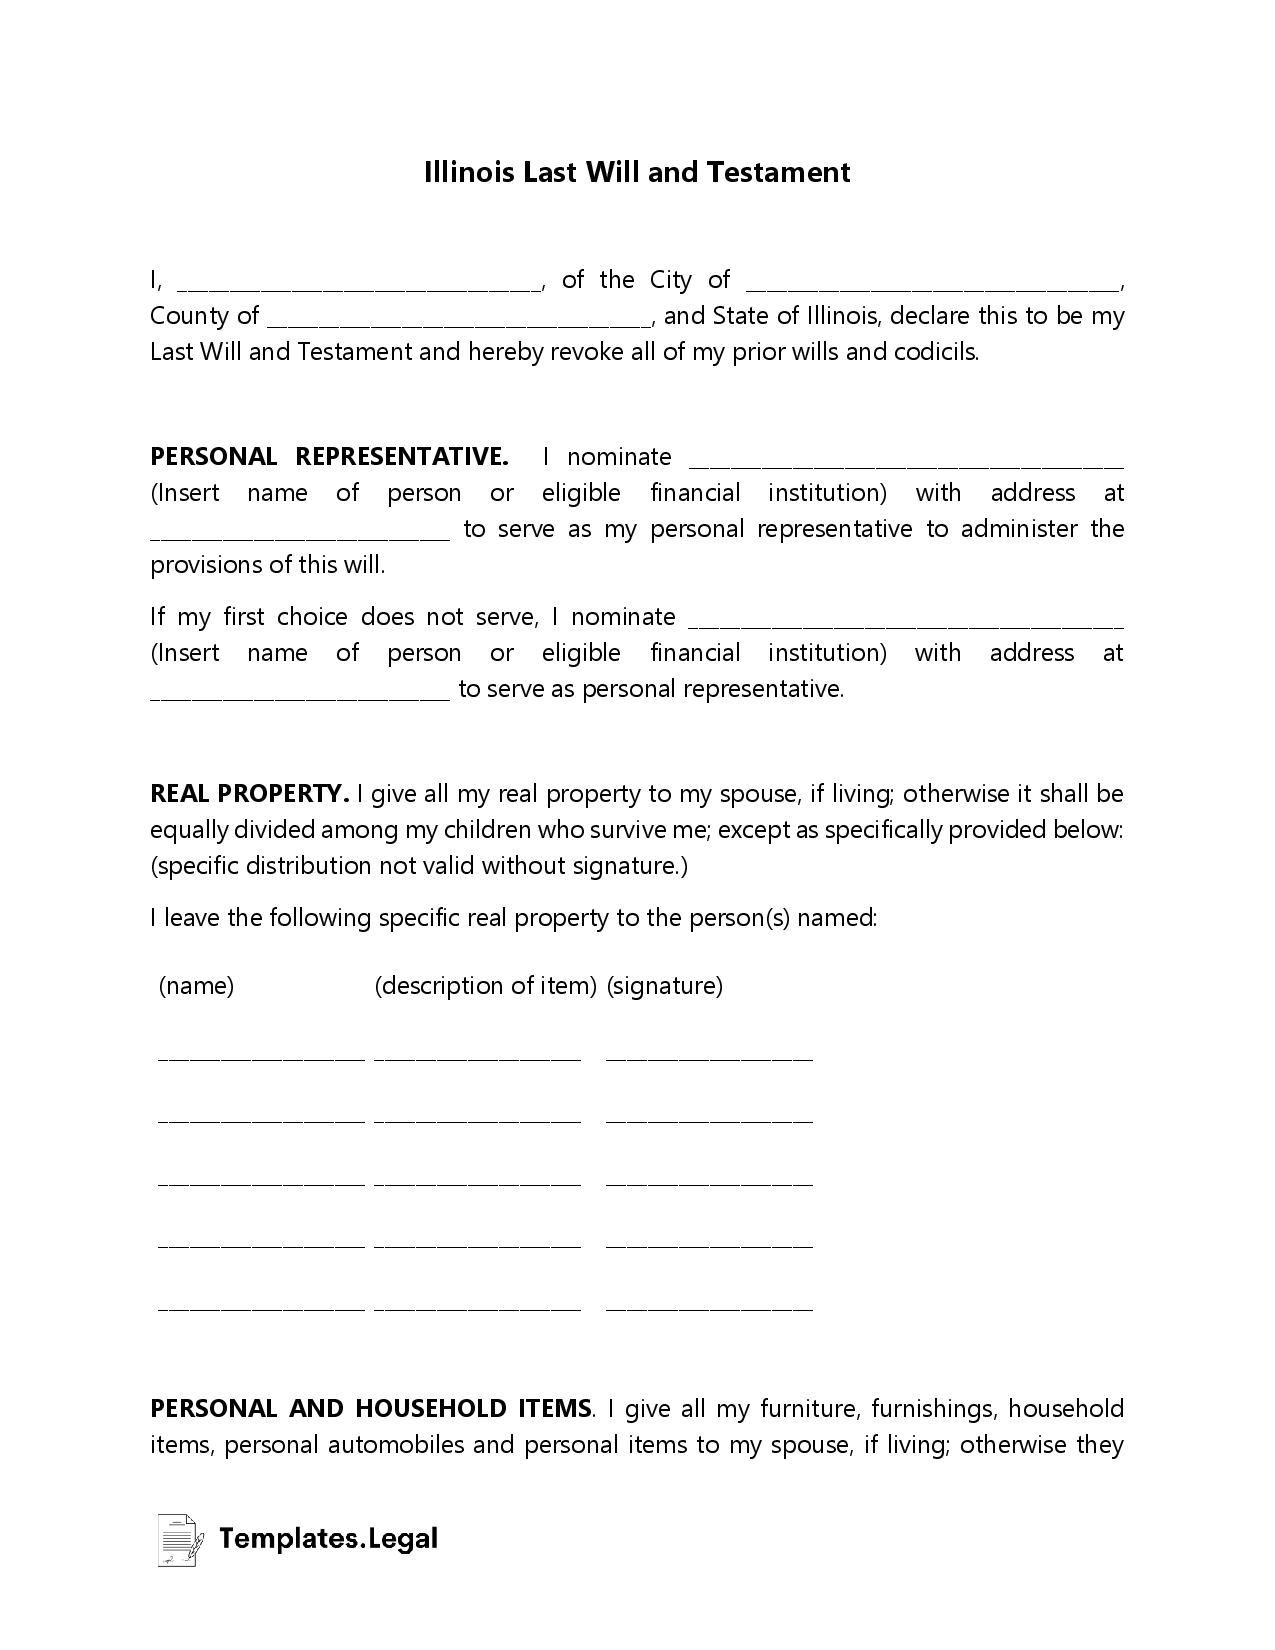 Illinois Last Will and Testament - Templates.Legal